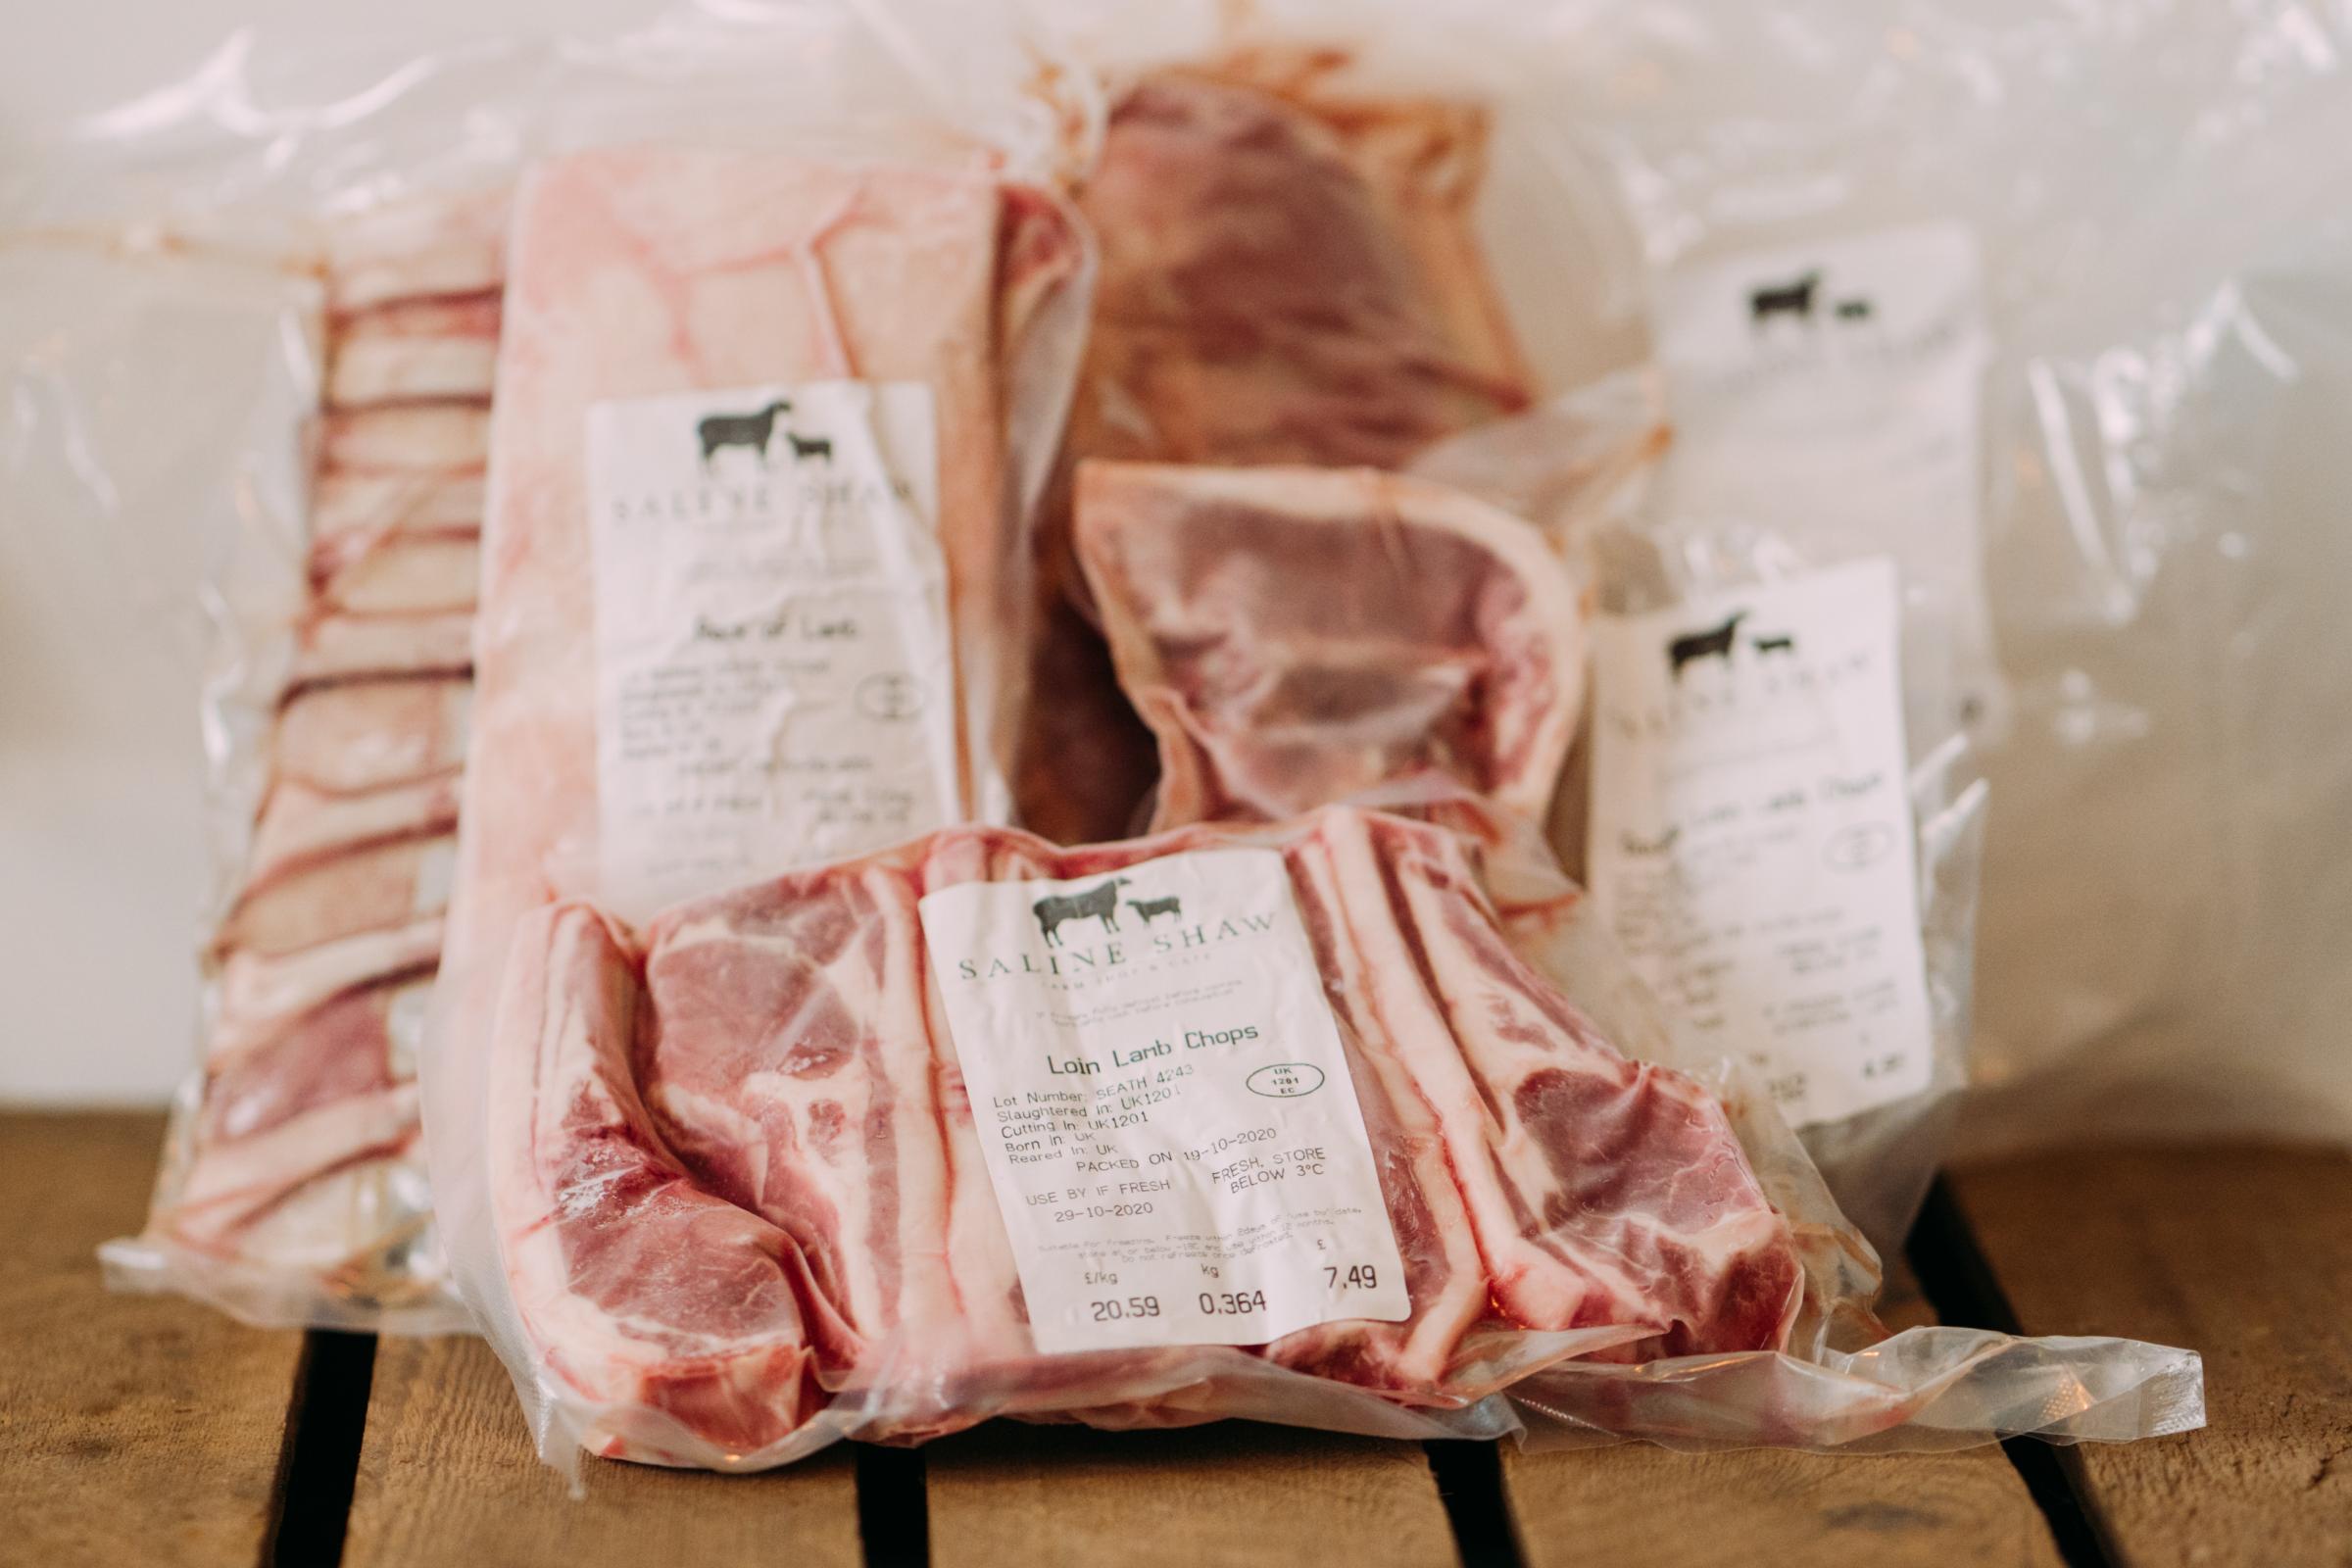 Home produced lamb packs have kept the shop busy for direct sales through the pandemic